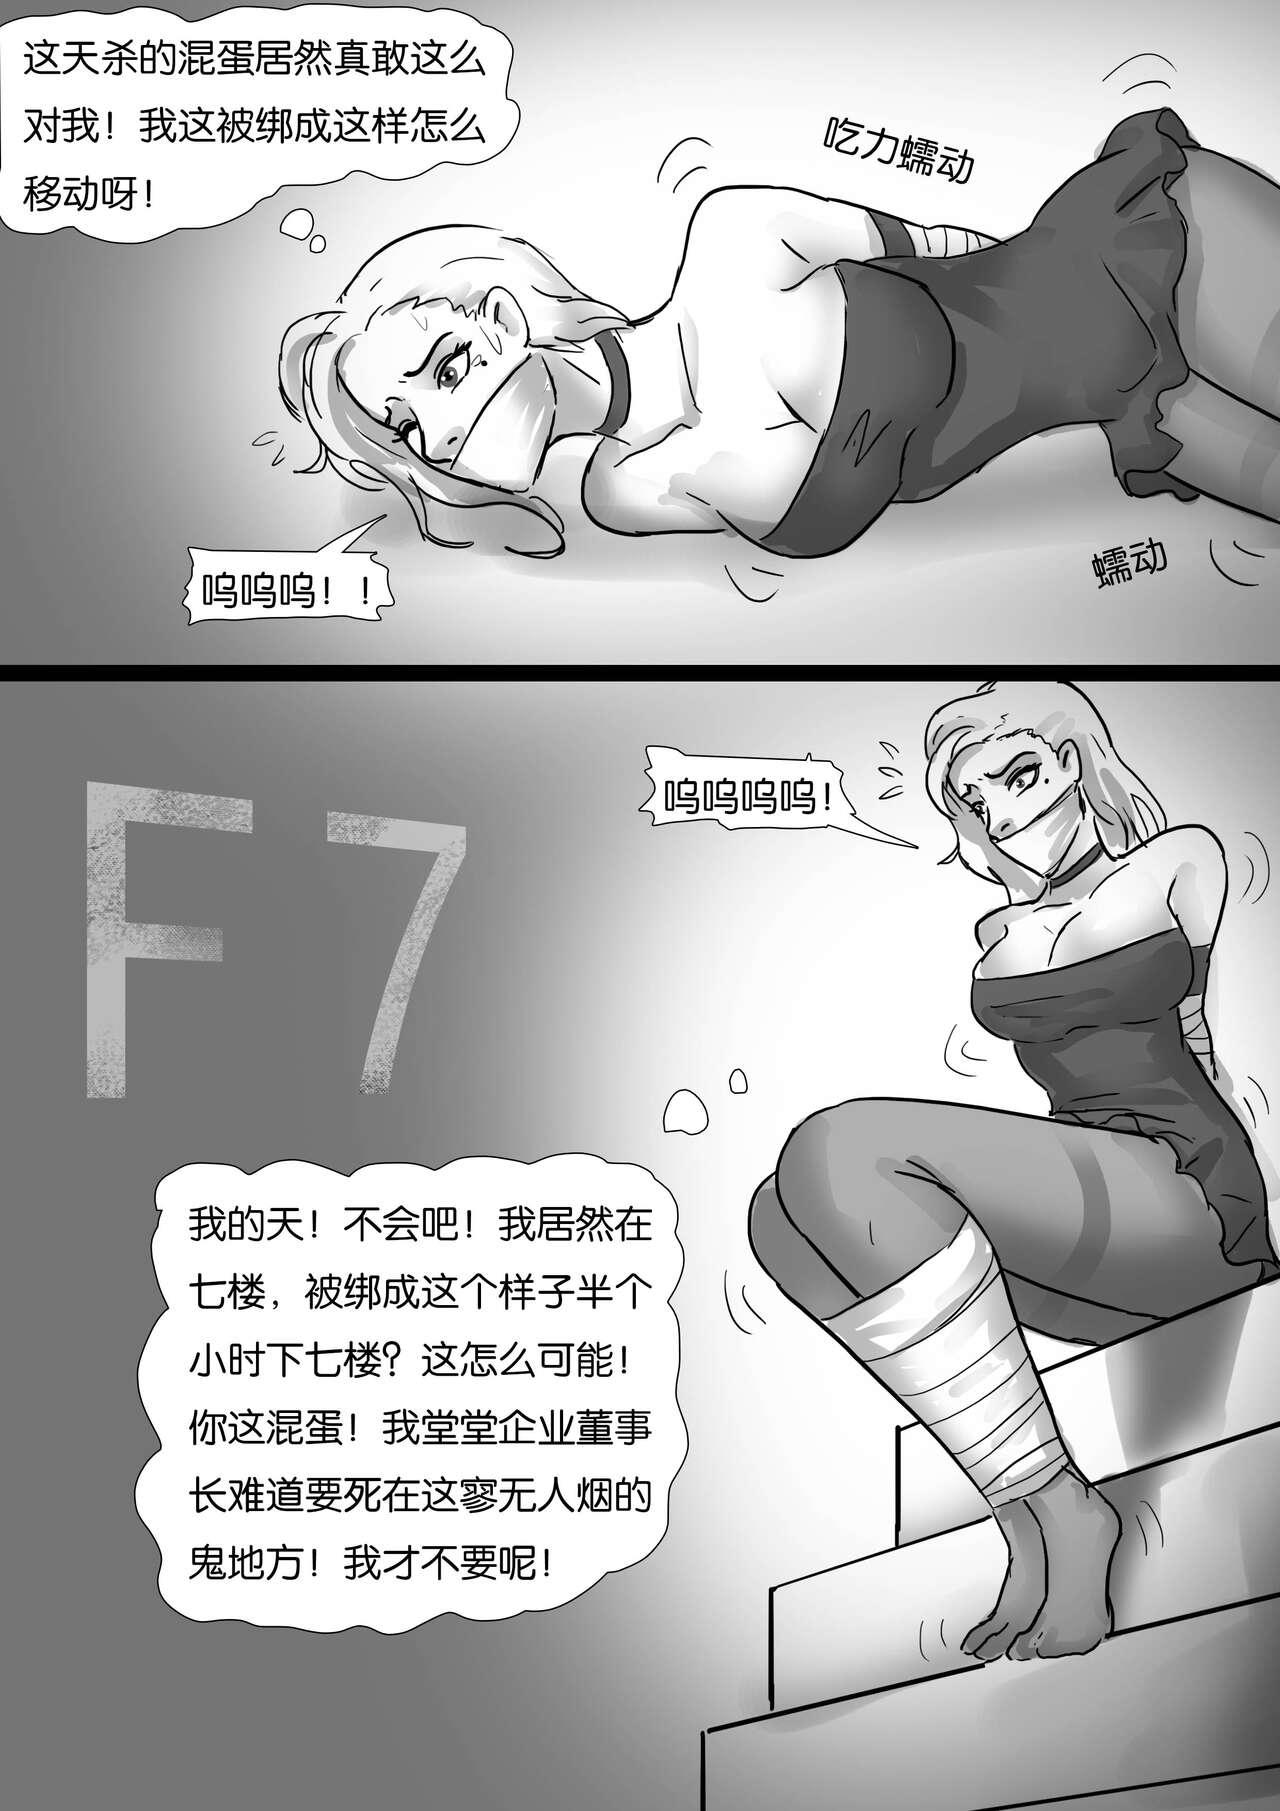 Masterbation 生死时速 Time Chacing Yanks Featured - Page 8